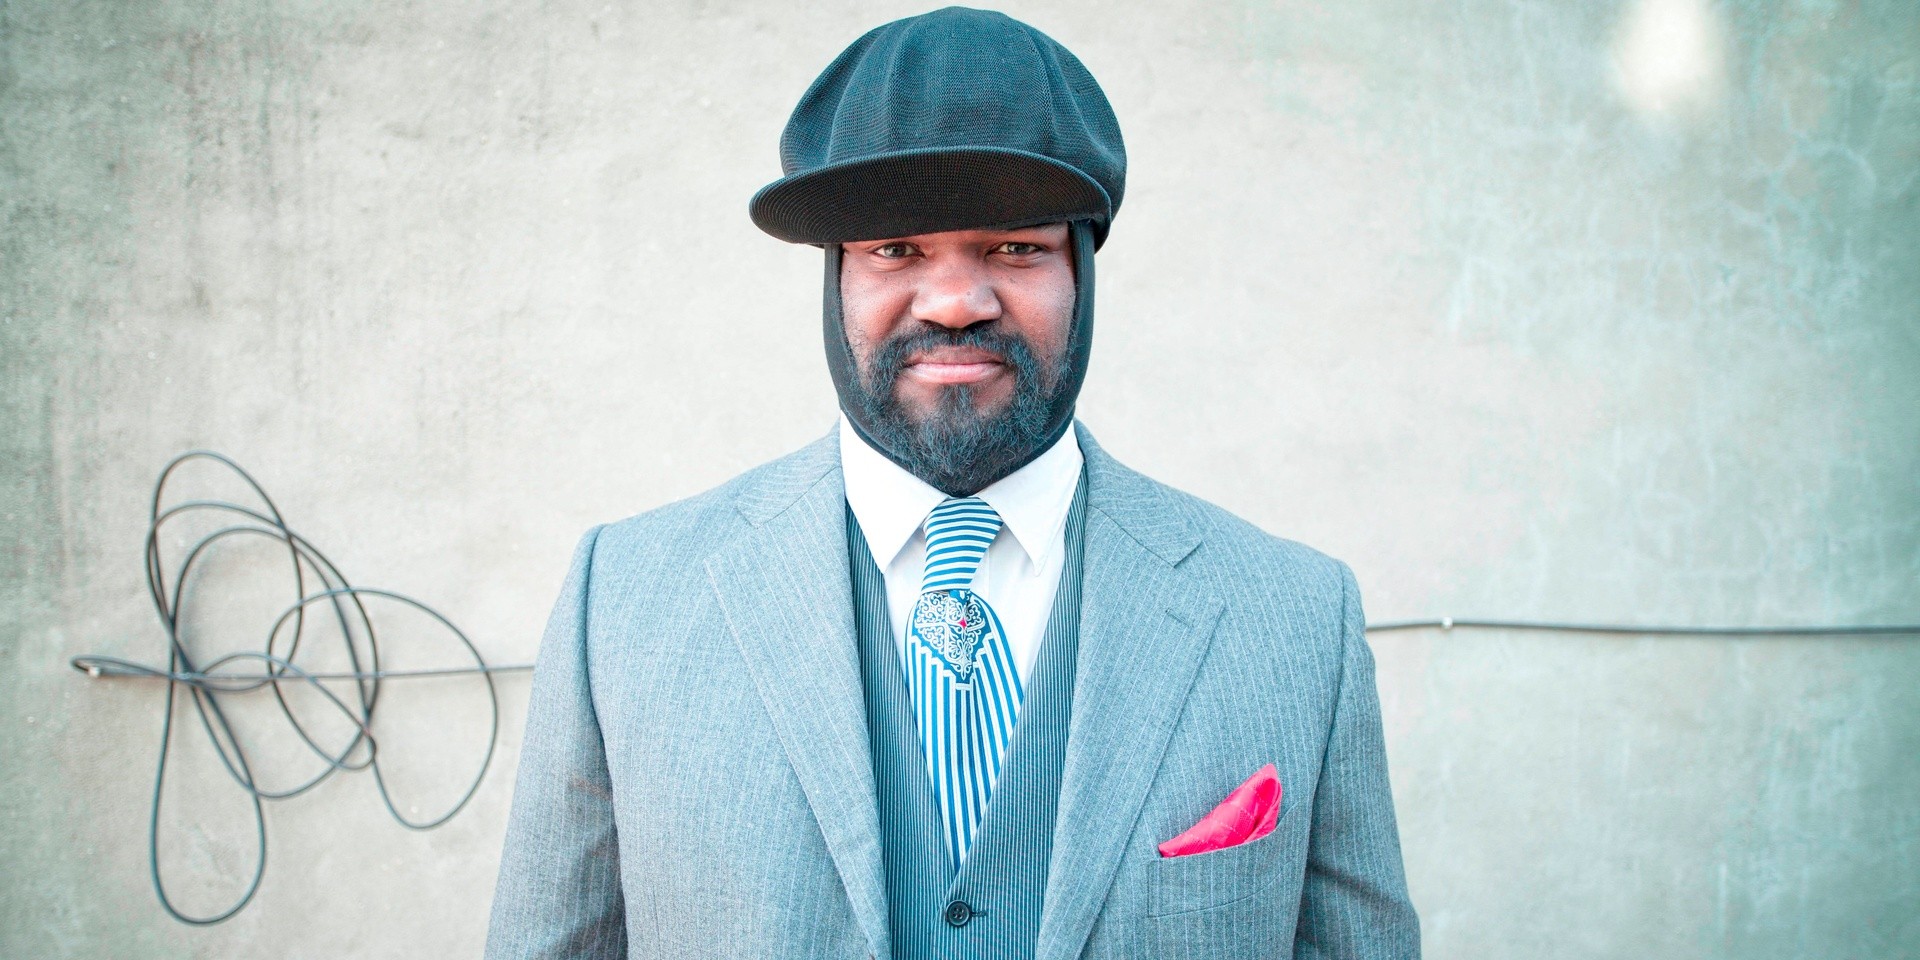 Renowned jazz singer Gregory Porter returns to Singapore for a solo showcase